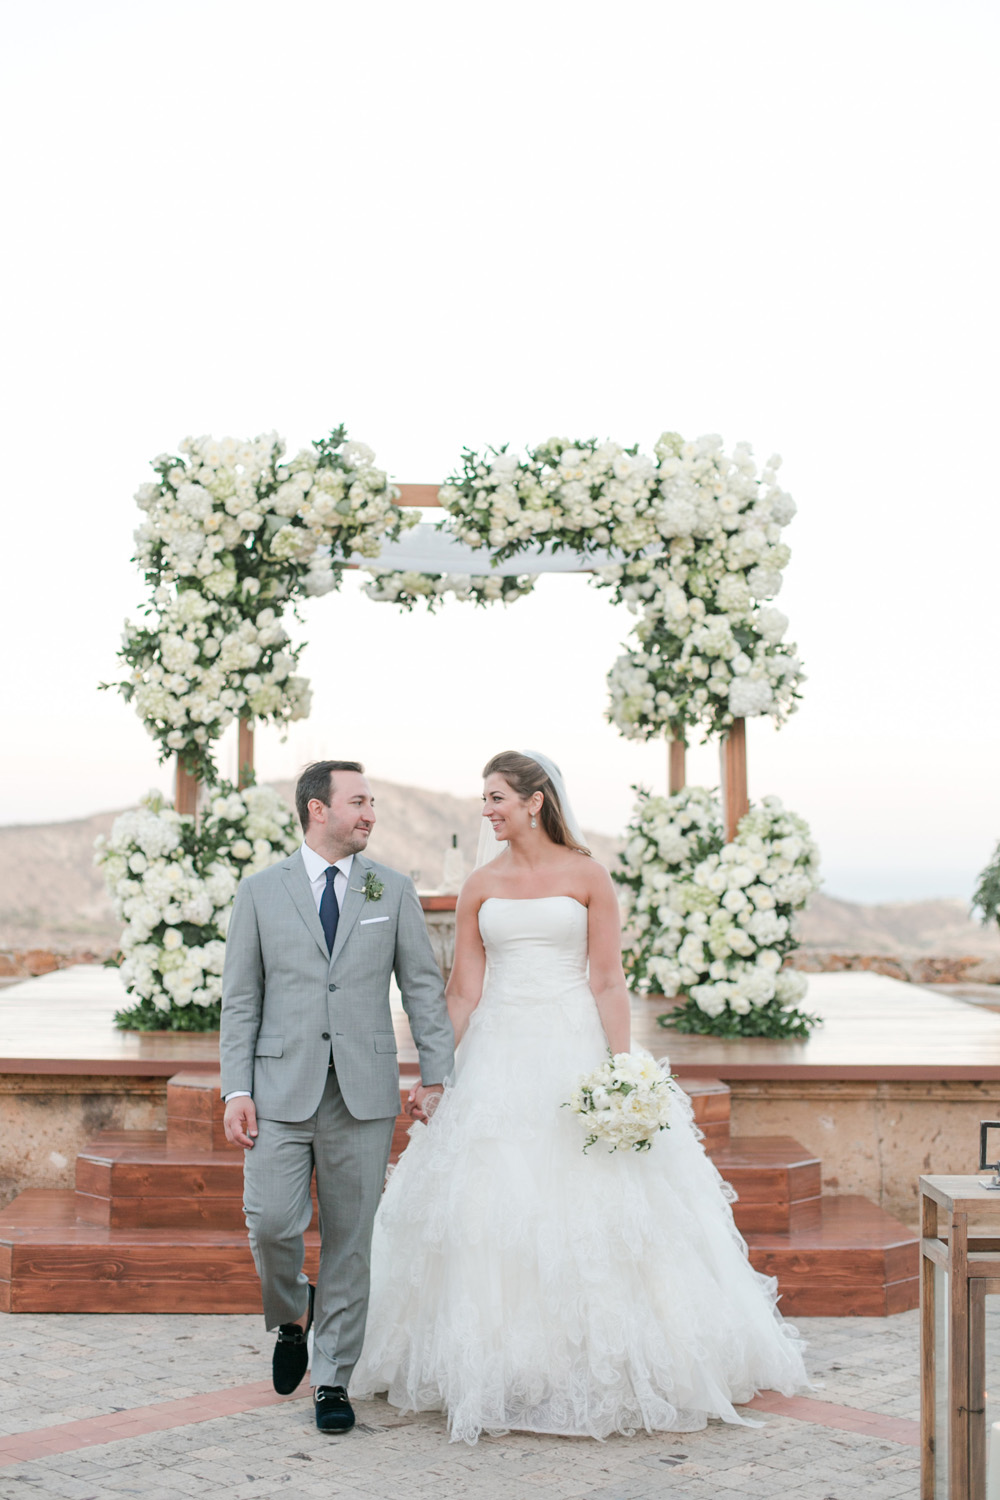 Bride in a flowing white gown and groom in a light gray suit holding hands and smiling at each other as they walk away from an altar adorned with lush white floral arrangements, set against a scenic outdoor backdrop.